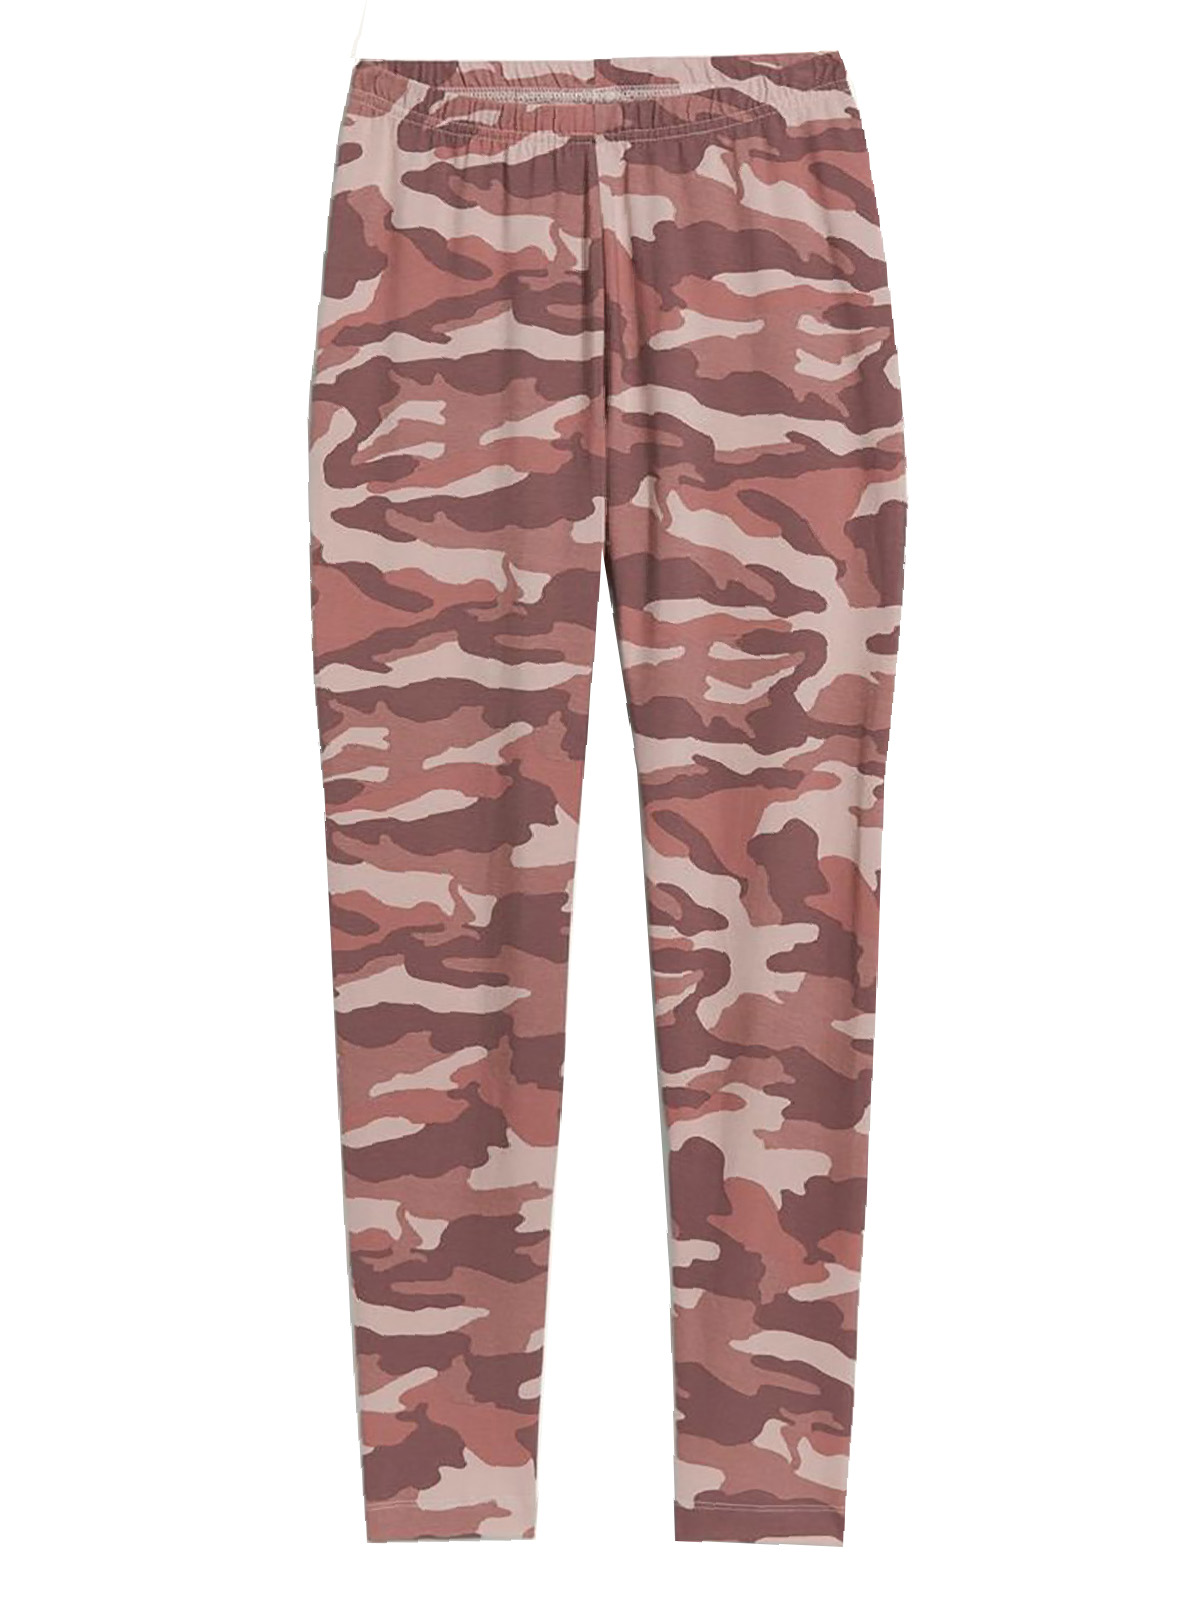 Old Navy - - Old Navy PINK CAMO Print High-Waisted Leggings - Size 6/8 ...